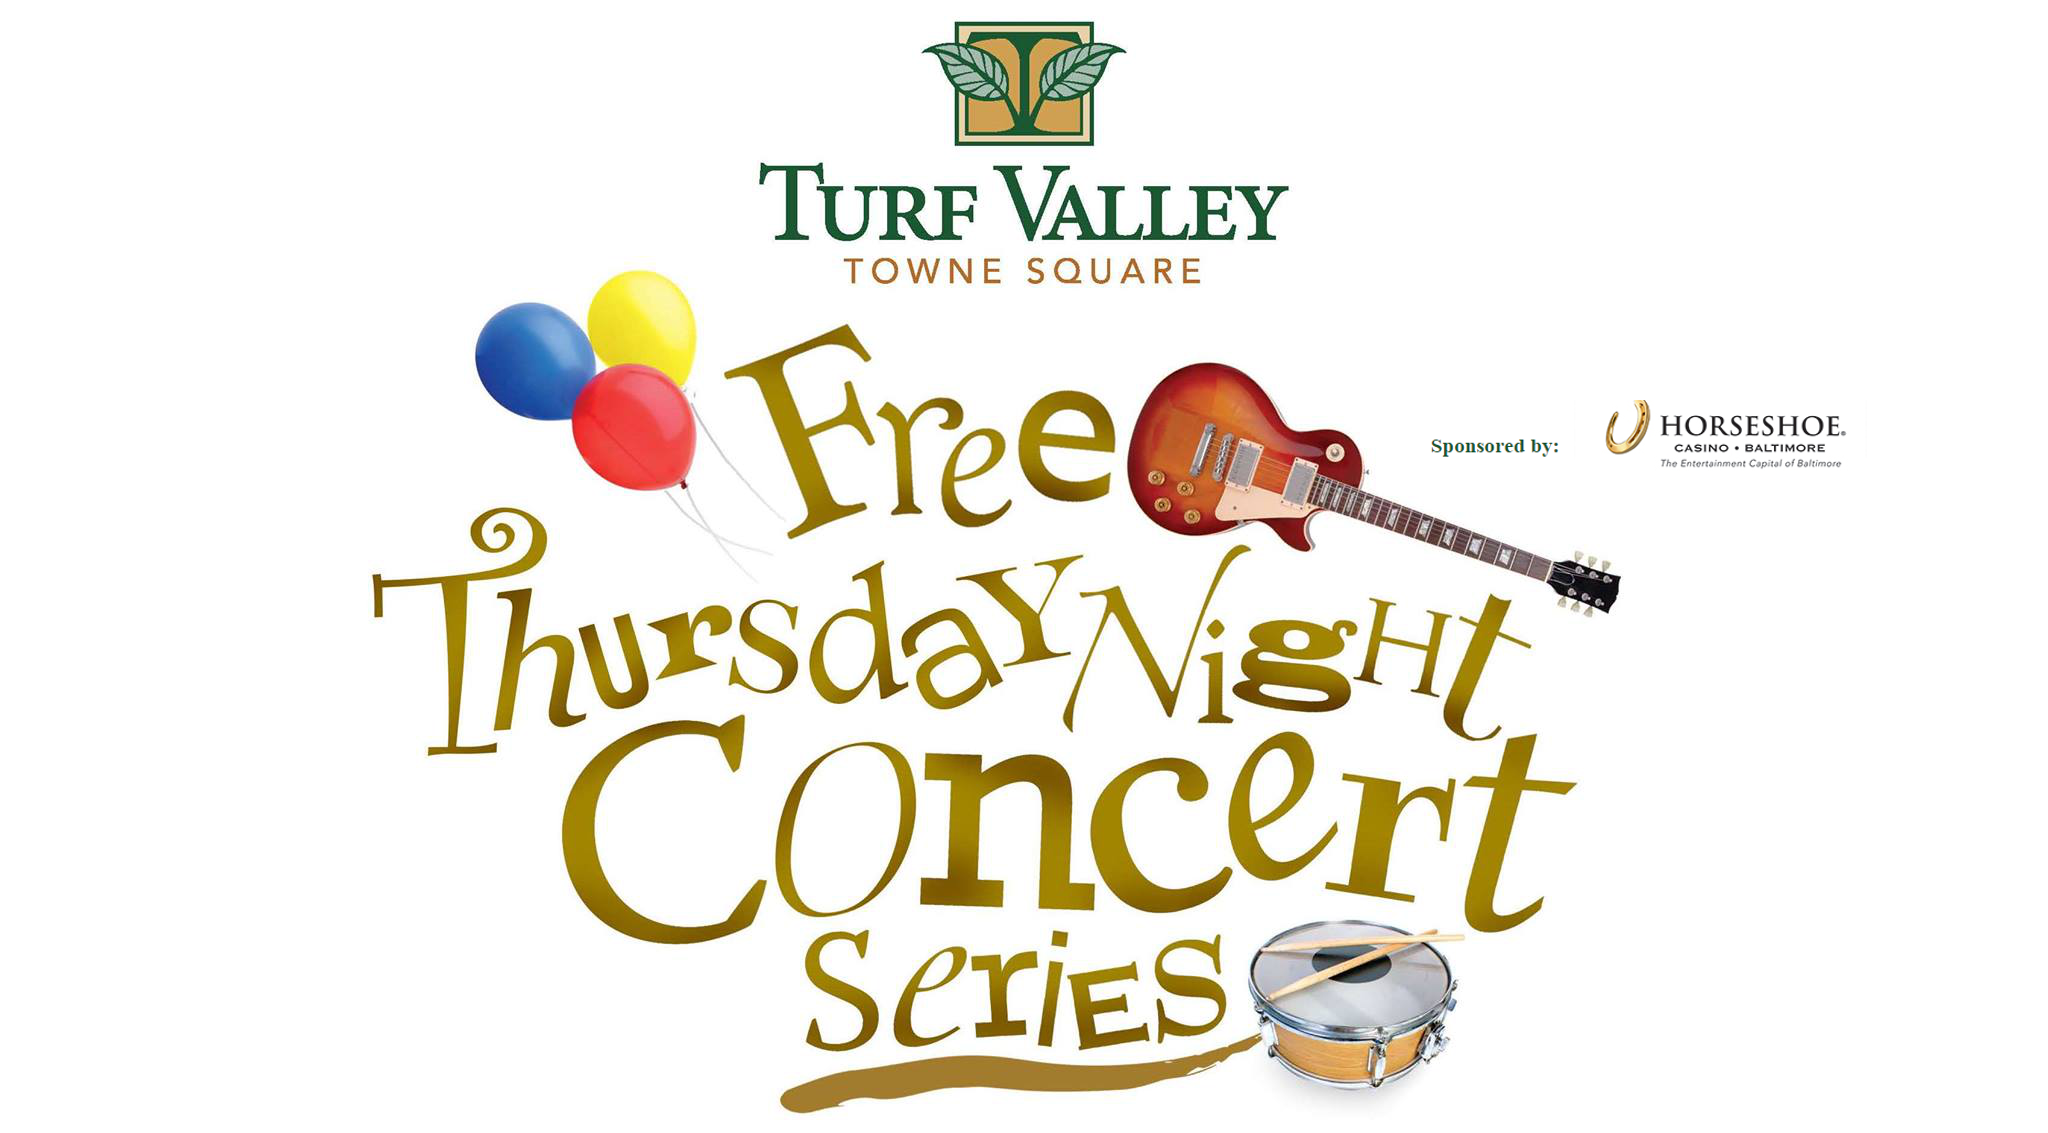 Paint Night at the Turf Valley Thursday Night Concert Series!